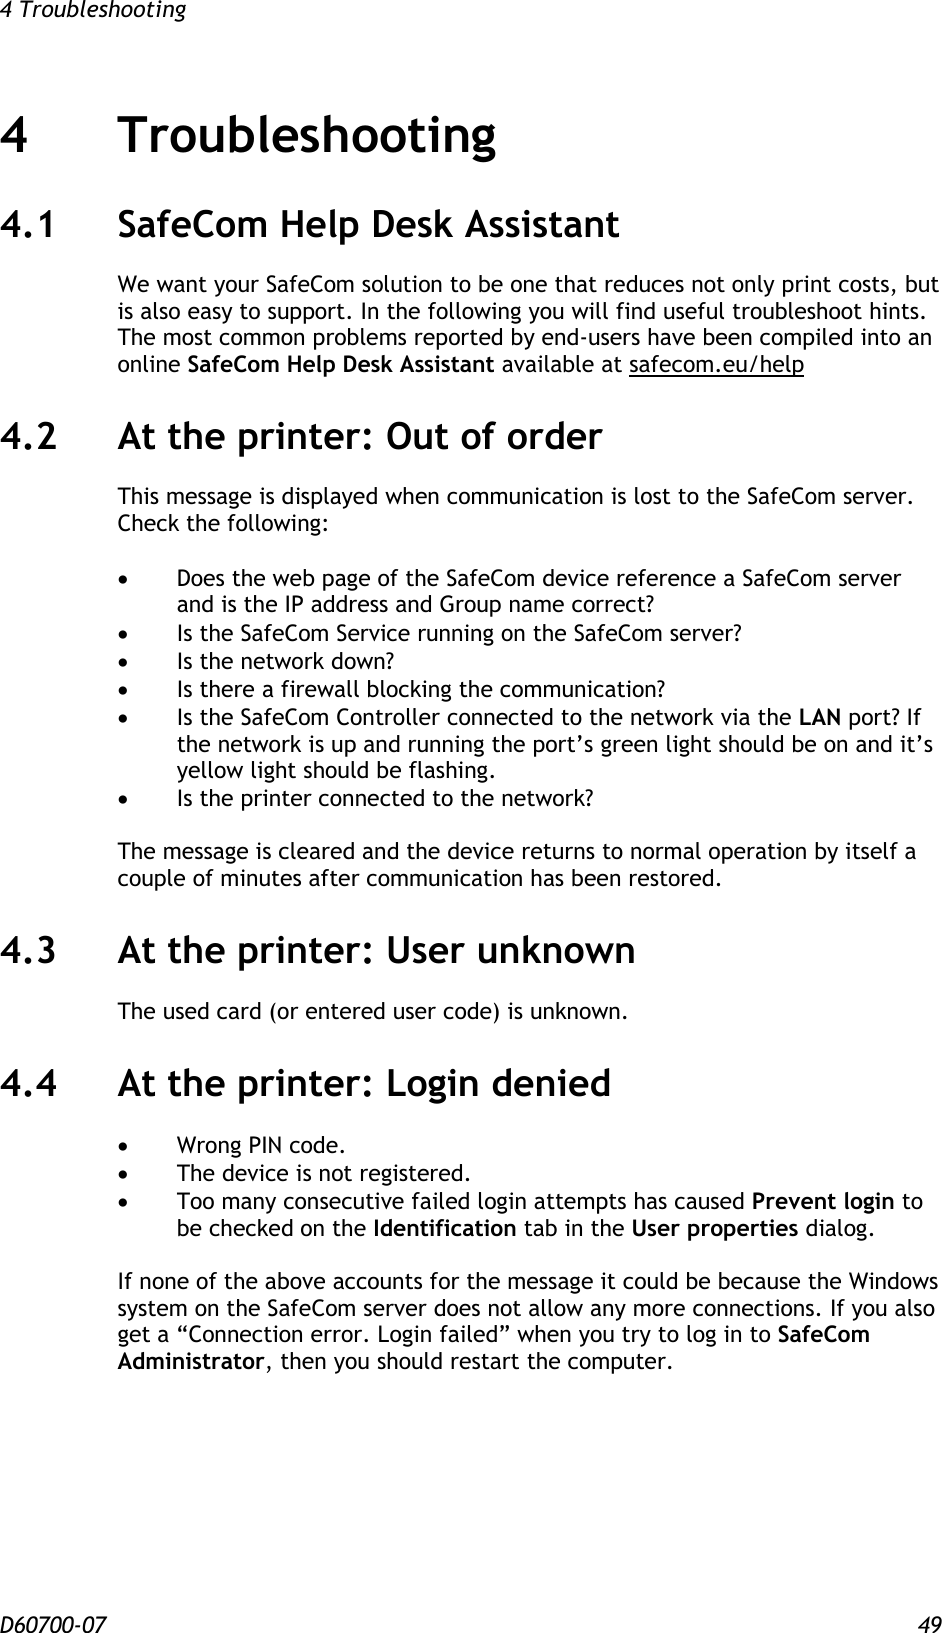 4 Troubleshooting  D60700-07 49 4 Troubleshooting 4.1 SafeCom Help Desk Assistant We want your SafeCom solution to be one that reduces not only print costs, but is also easy to support. In the following you will find useful troubleshoot hints. The most common problems reported by end-users have been compiled into an online SafeCom Help Desk Assistant available at safecom.eu/help 4.2 At the printer: Out of order This message is displayed when communication is lost to the SafeCom server. Check the following:   Does the web page of the SafeCom device reference a SafeCom server and is the IP address and Group name correct?  Is the SafeCom Service running on the SafeCom server?  Is the network down?  Is there a firewall blocking the communication?  Is the SafeCom Controller connected to the network via the LAN port? If the network is up and running the port’s green light should be on and it’s yellow light should be flashing.  Is the printer connected to the network?  The message is cleared and the device returns to normal operation by itself a couple of minutes after communication has been restored. 4.3 At the printer: User unknown  The used card (or entered user code) is unknown. 4.4 At the printer: Login denied   Wrong PIN code.  The device is not registered.  Too many consecutive failed login attempts has caused Prevent login to be checked on the Identification tab in the User properties dialog.   If none of the above accounts for the message it could be because the Windows system on the SafeCom server does not allow any more connections. If you also get a “Connection error. Login failed” when you try to log in to SafeCom Administrator, then you should restart the computer. 